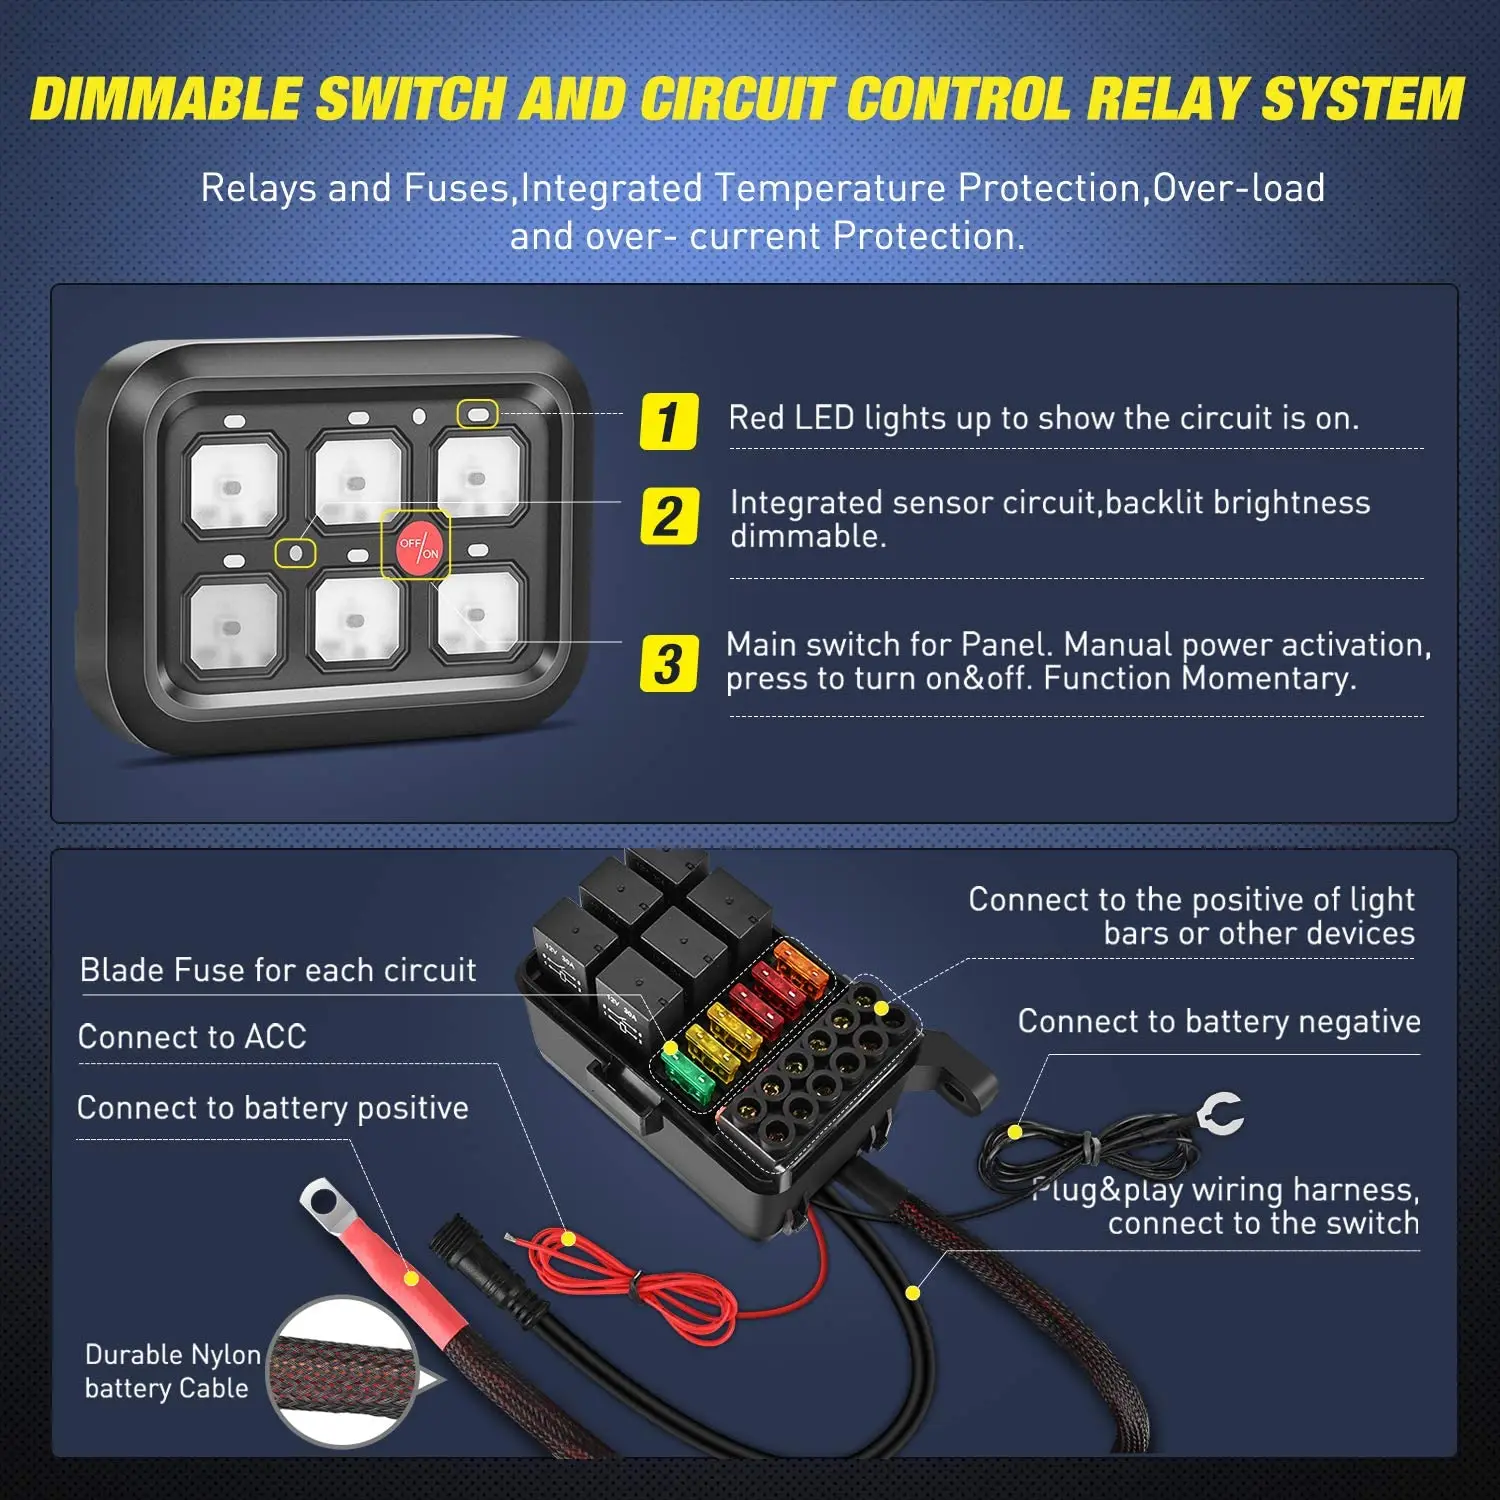 Automatic Dimmable 6 Gang Switch Panel with Universal Circuit Control Relay System Box for Cars Trucks Boats ATV UTV SUV